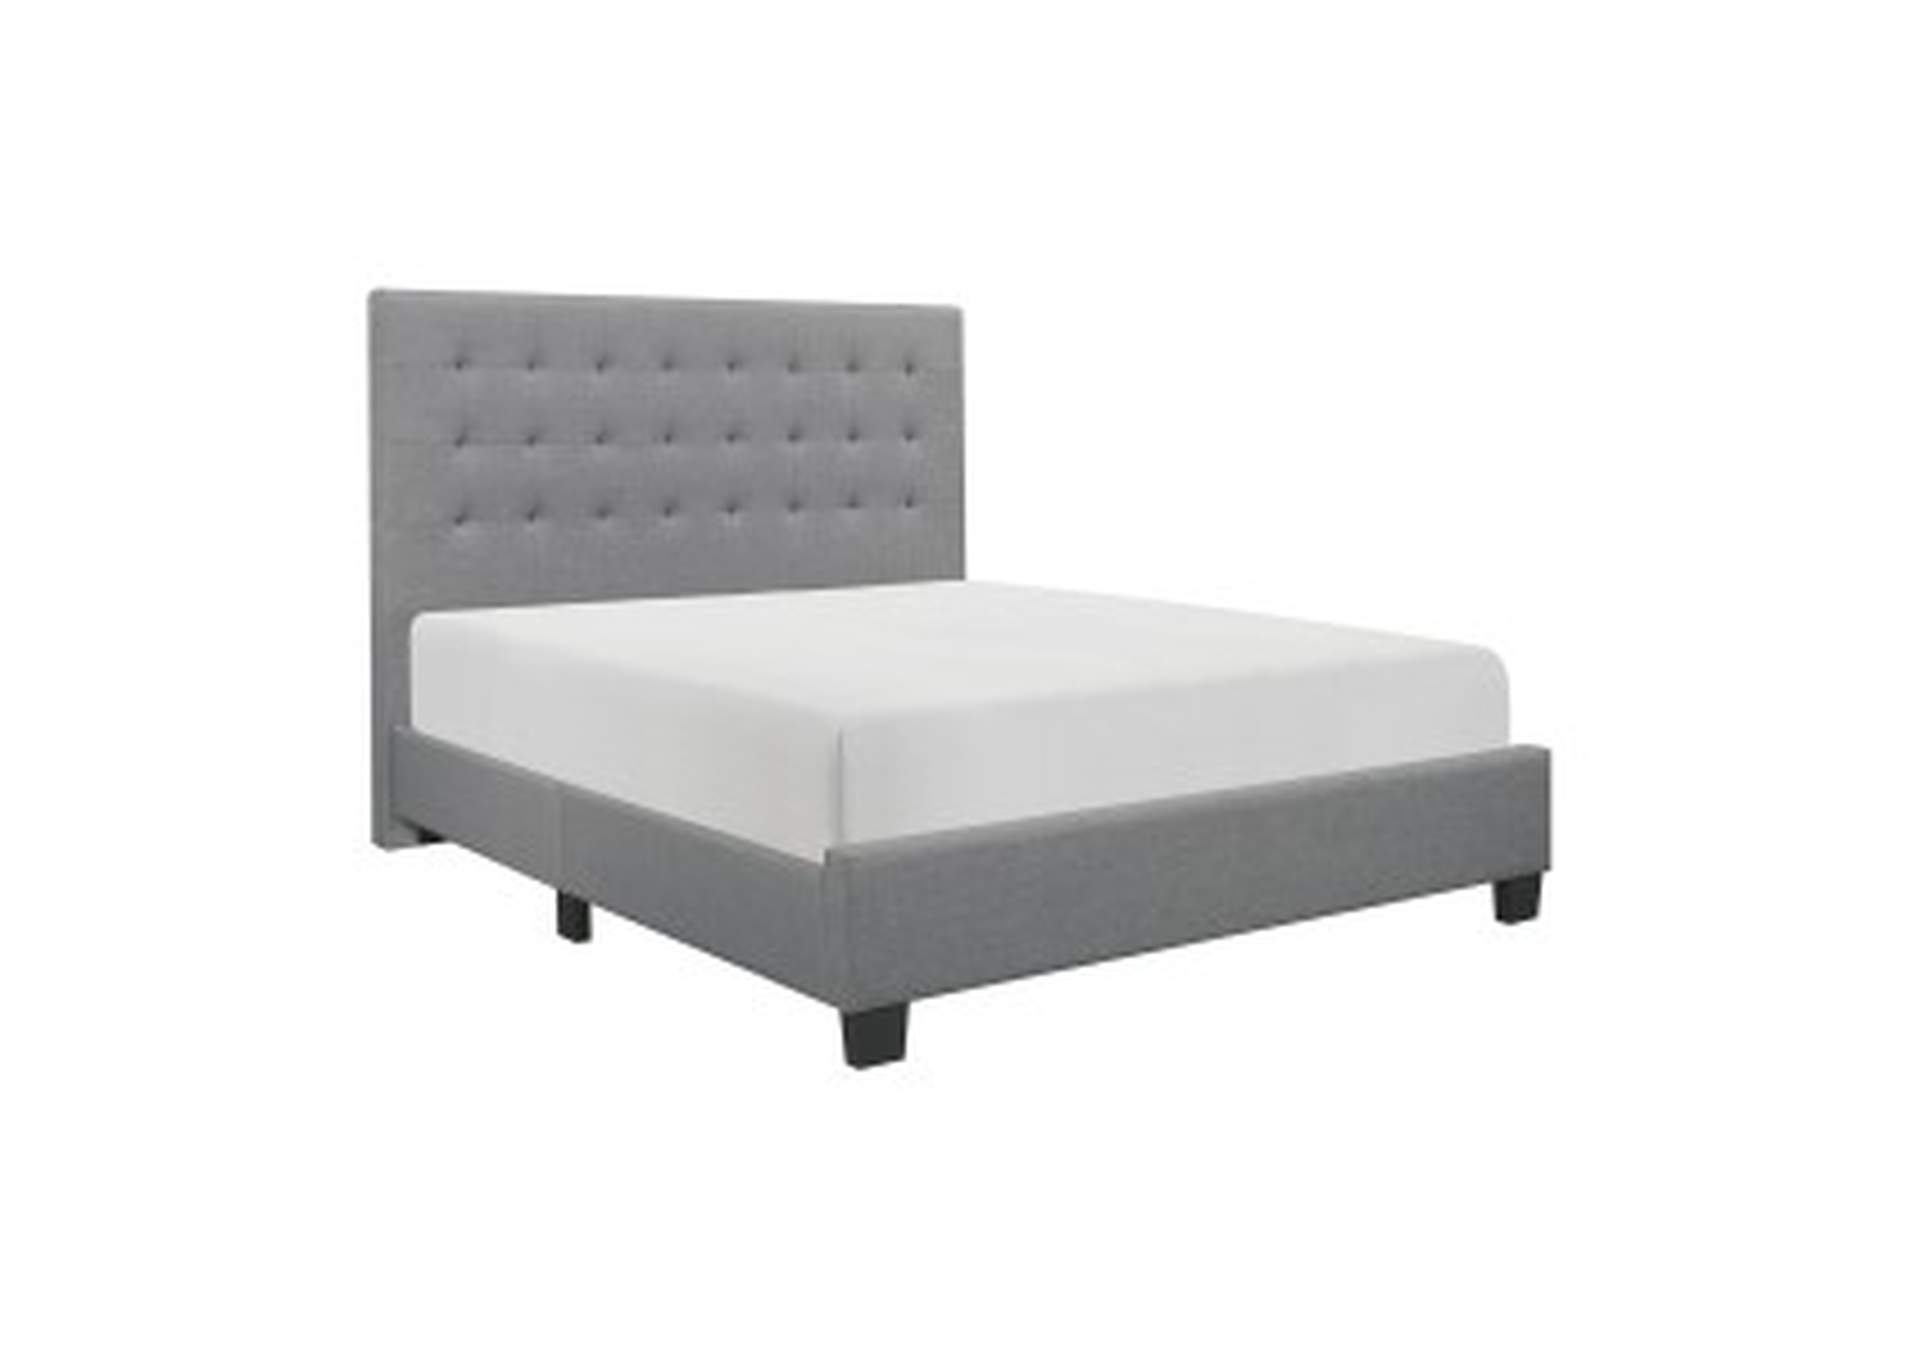 Lawrence Queen Bed In A Box,Homelegance